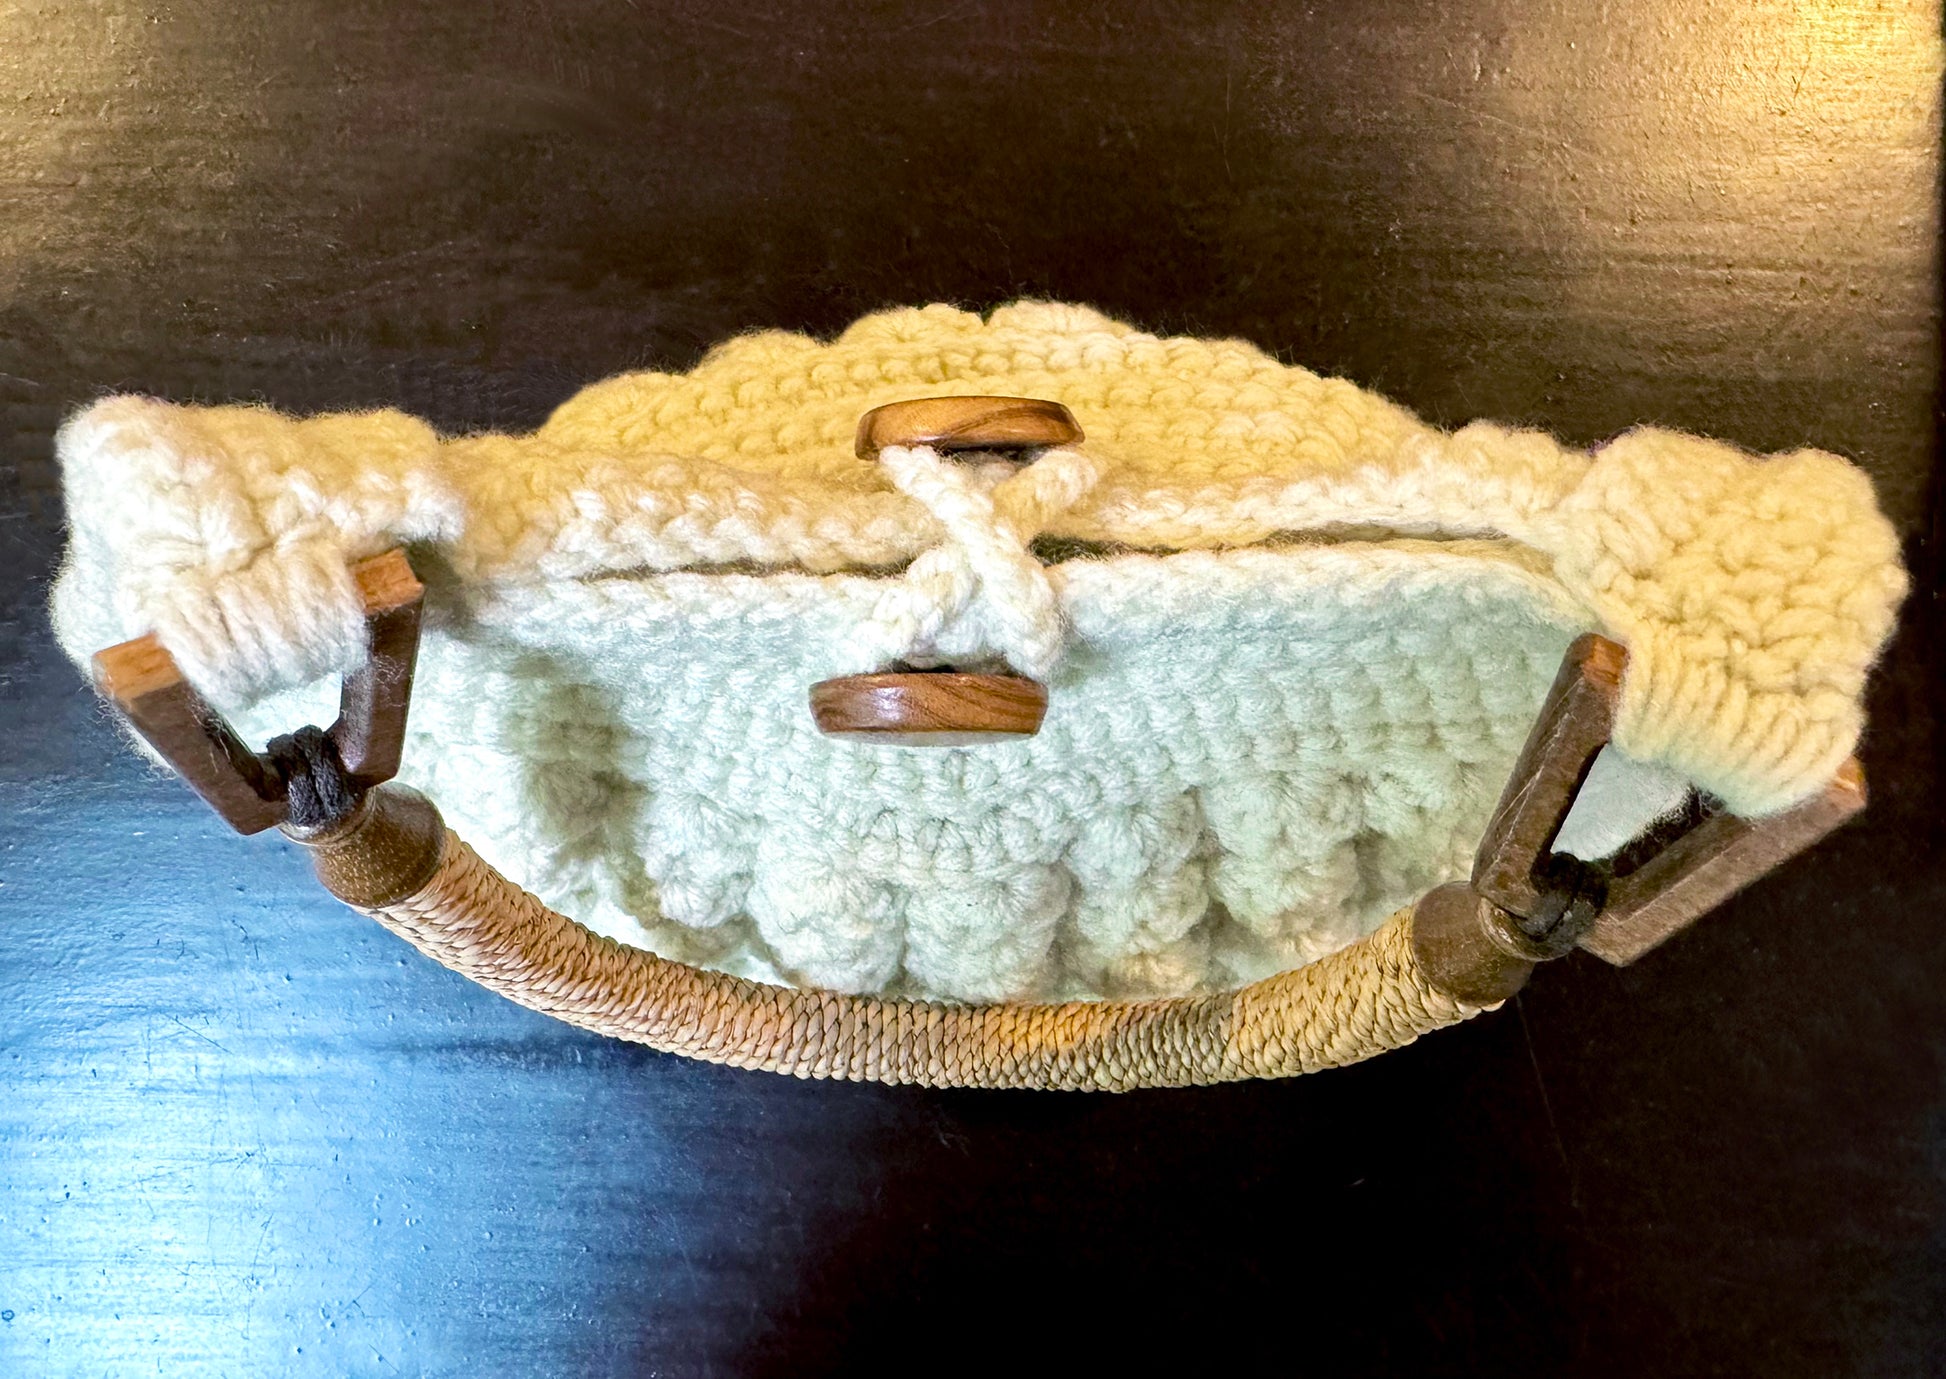 Bali's beautiful bamboo forests reflect in this Boho chic, hand crocheted bag by Oda G. exclusively for MarVia Square. Eco-conscious with up-cycled, cotton blend yarn, raffia handles, bamboo hooks, and buttons. Dimensions: Height: 15"(to top of handle), Length: 10" Width: 4" Color: Cream Hand wash, cold, or dry clean Made in California Can be special ordered in other colors if available. Please email us your color request and allow 3 to 4 weeks to complete.